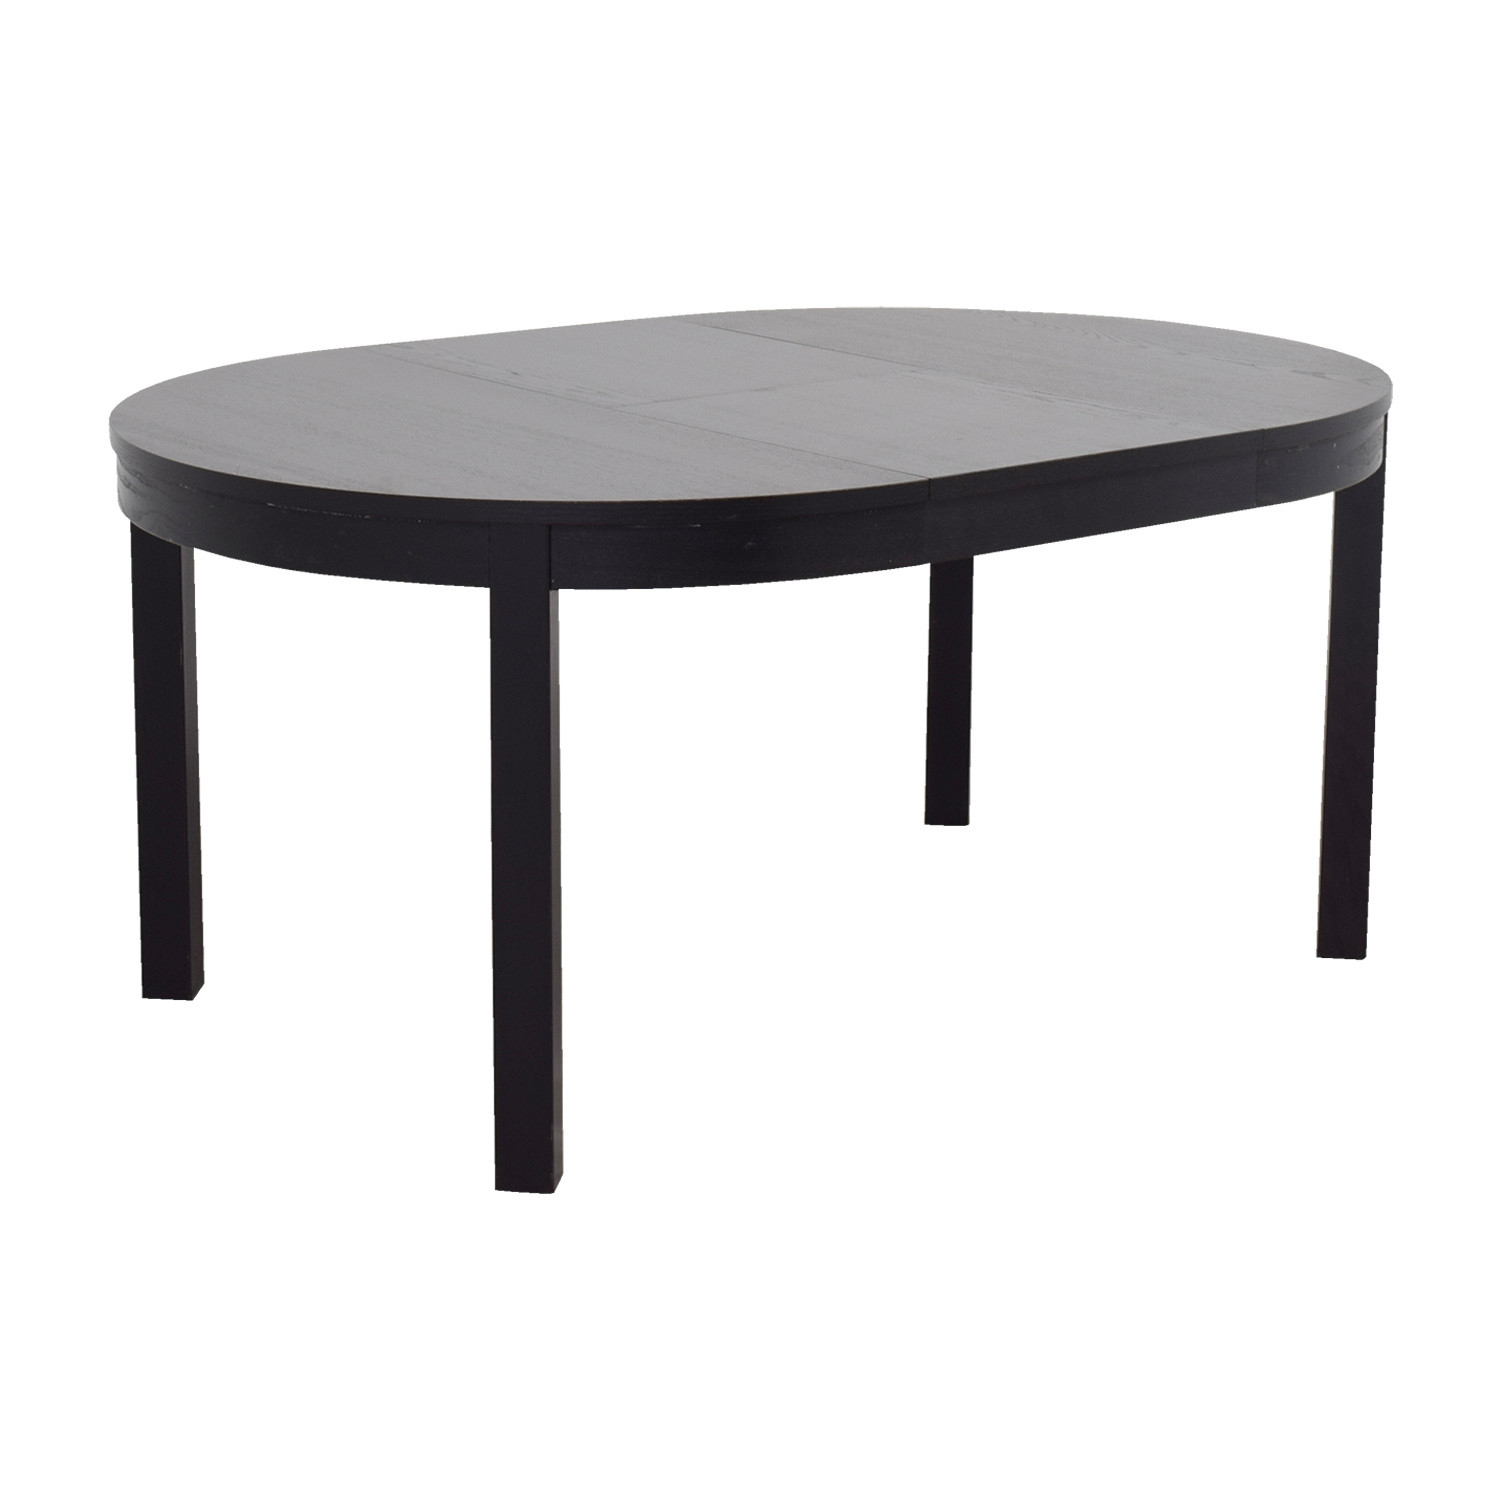 Best ideas about Ikea Round Dining Table
. Save or Pin OFF IKEA IKEA Bjursta Extendable Round to Oval Now.